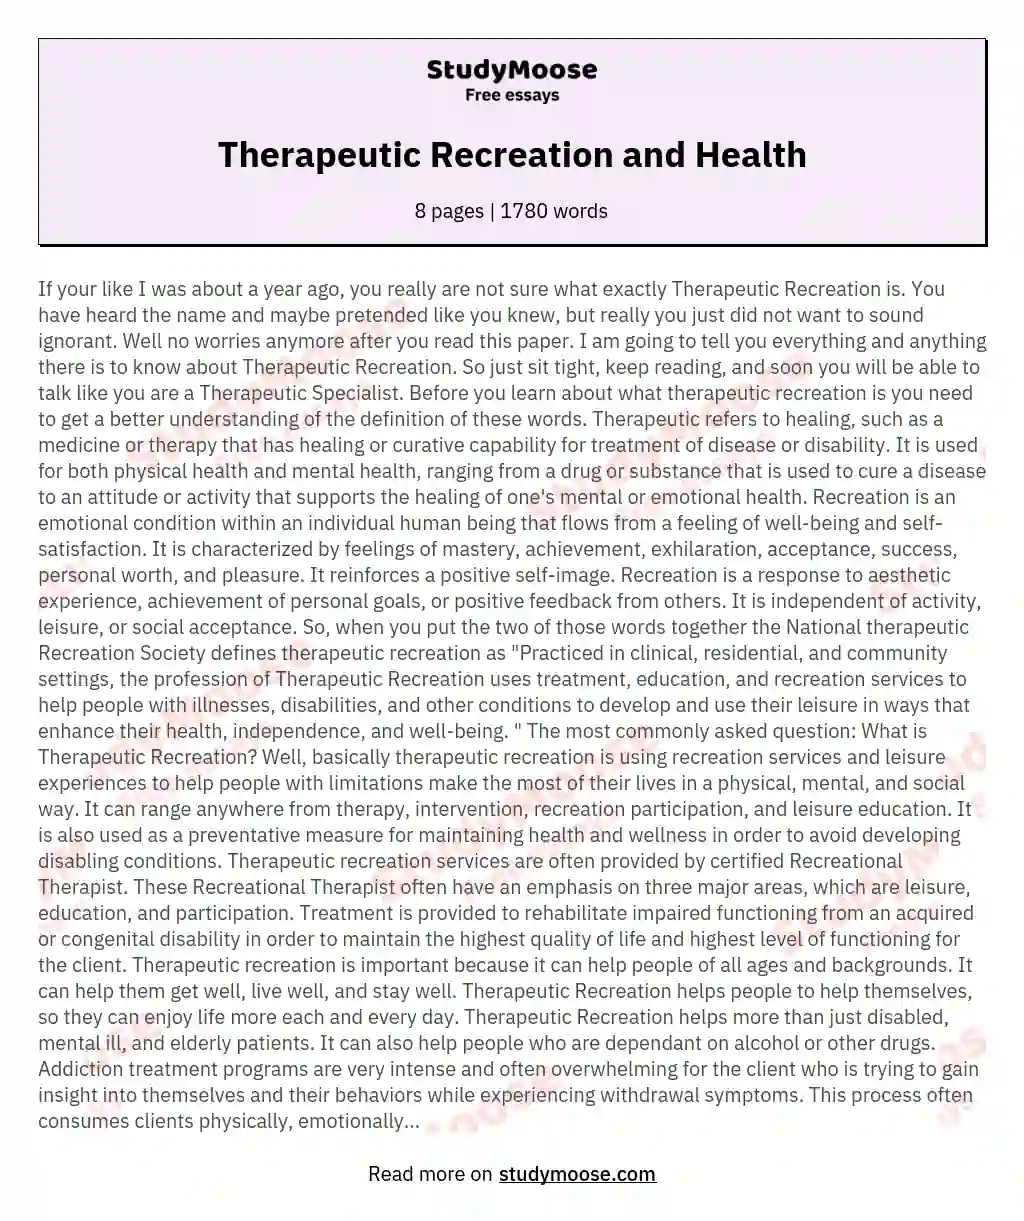 Therapeutic Recreation and Health essay